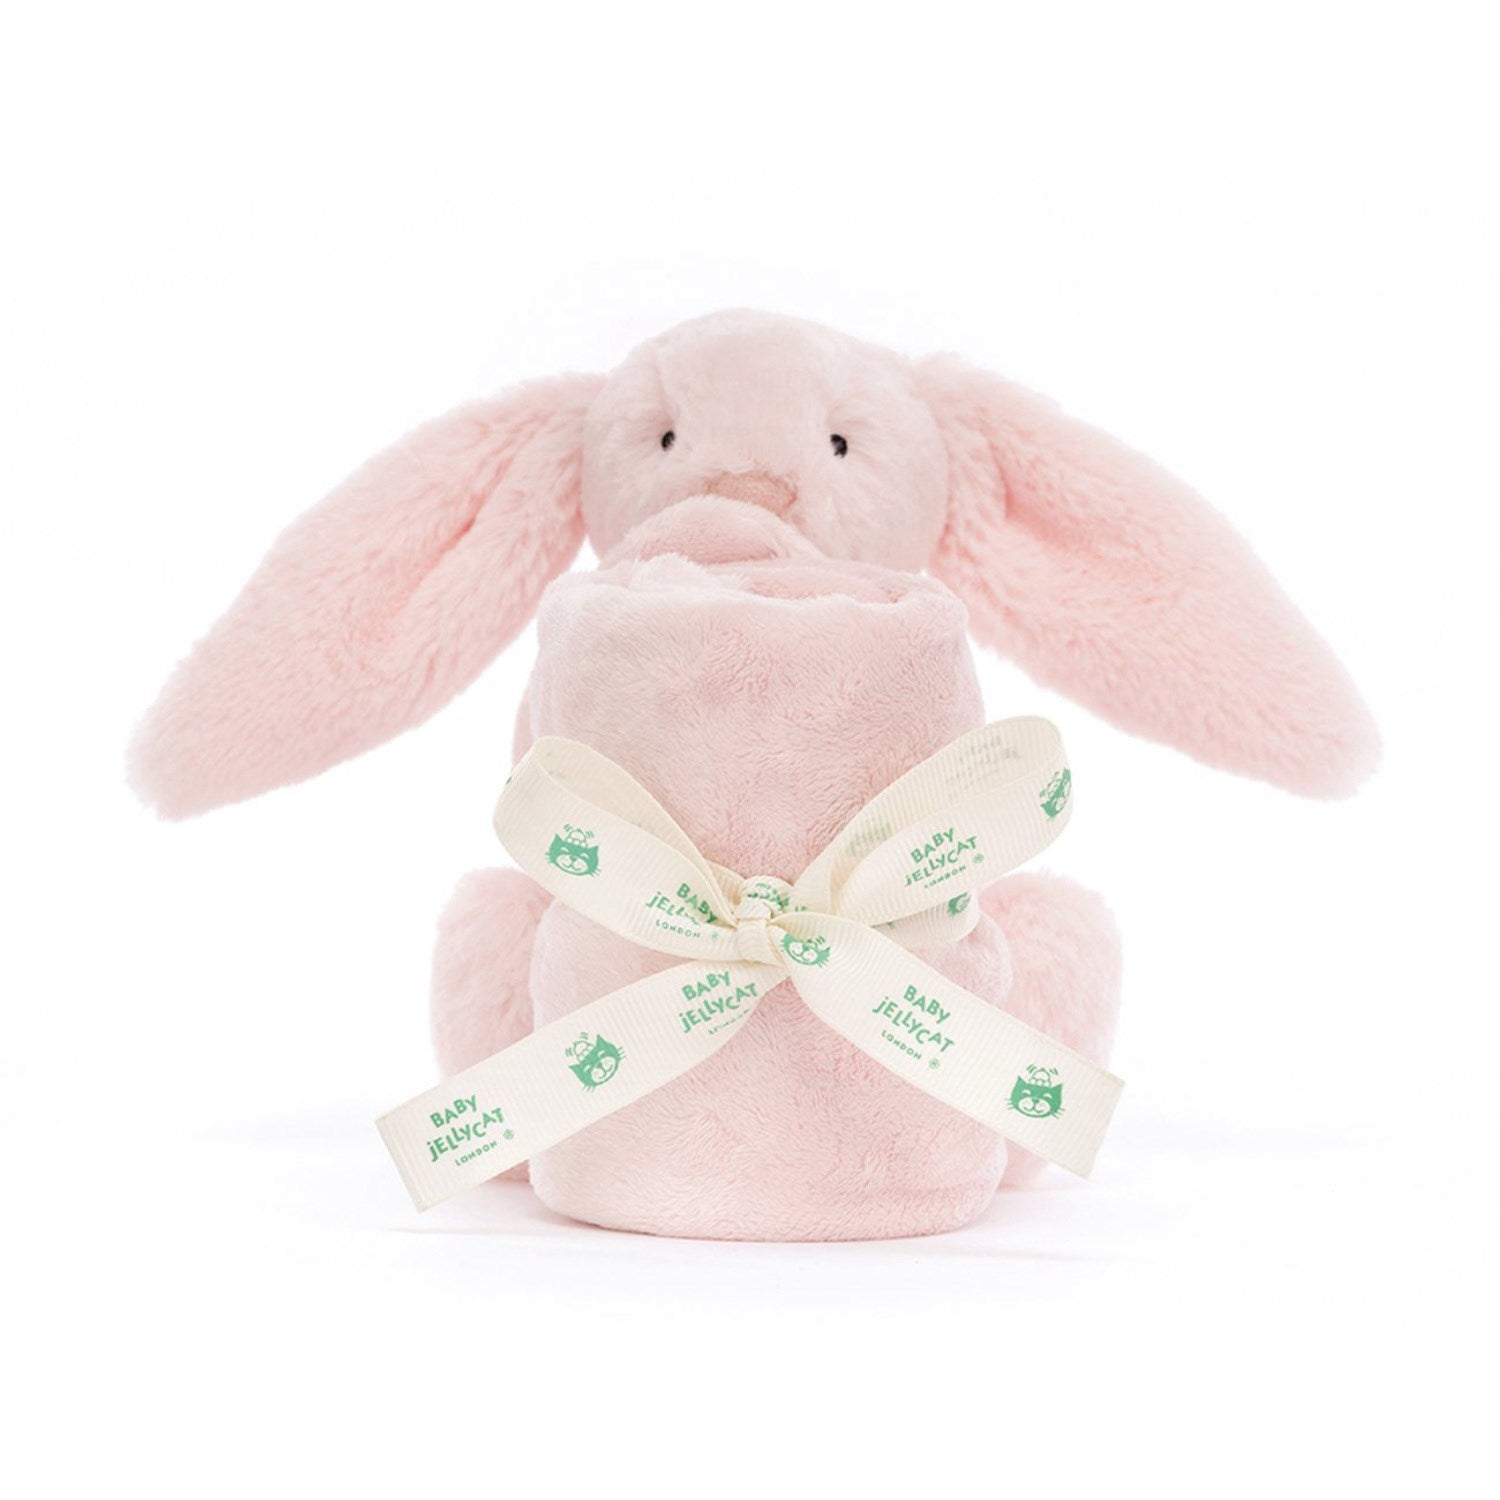   Bashful Pink Bunny Soother 2